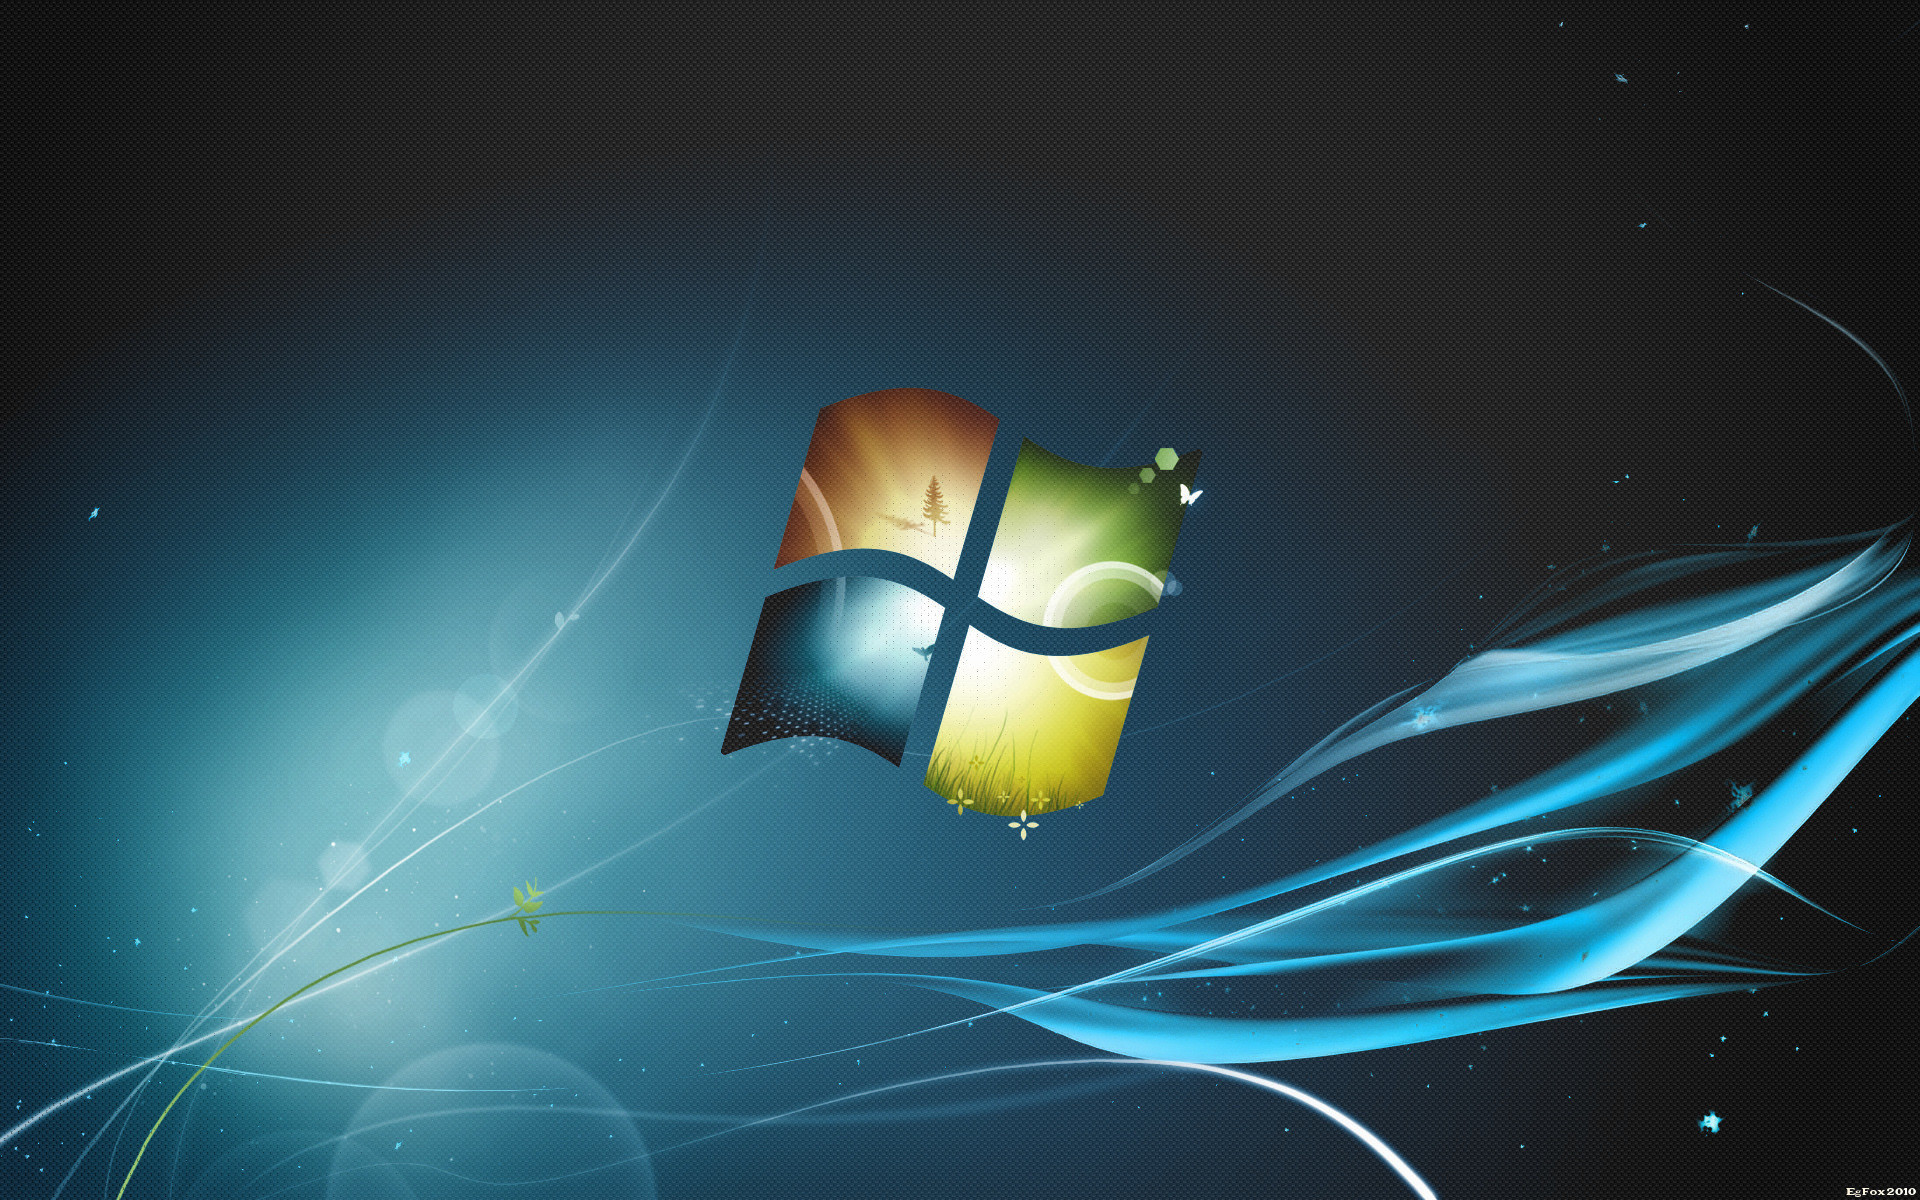 windows 7 backgrounds hd wallpapers windows 7 backgrounds hd .